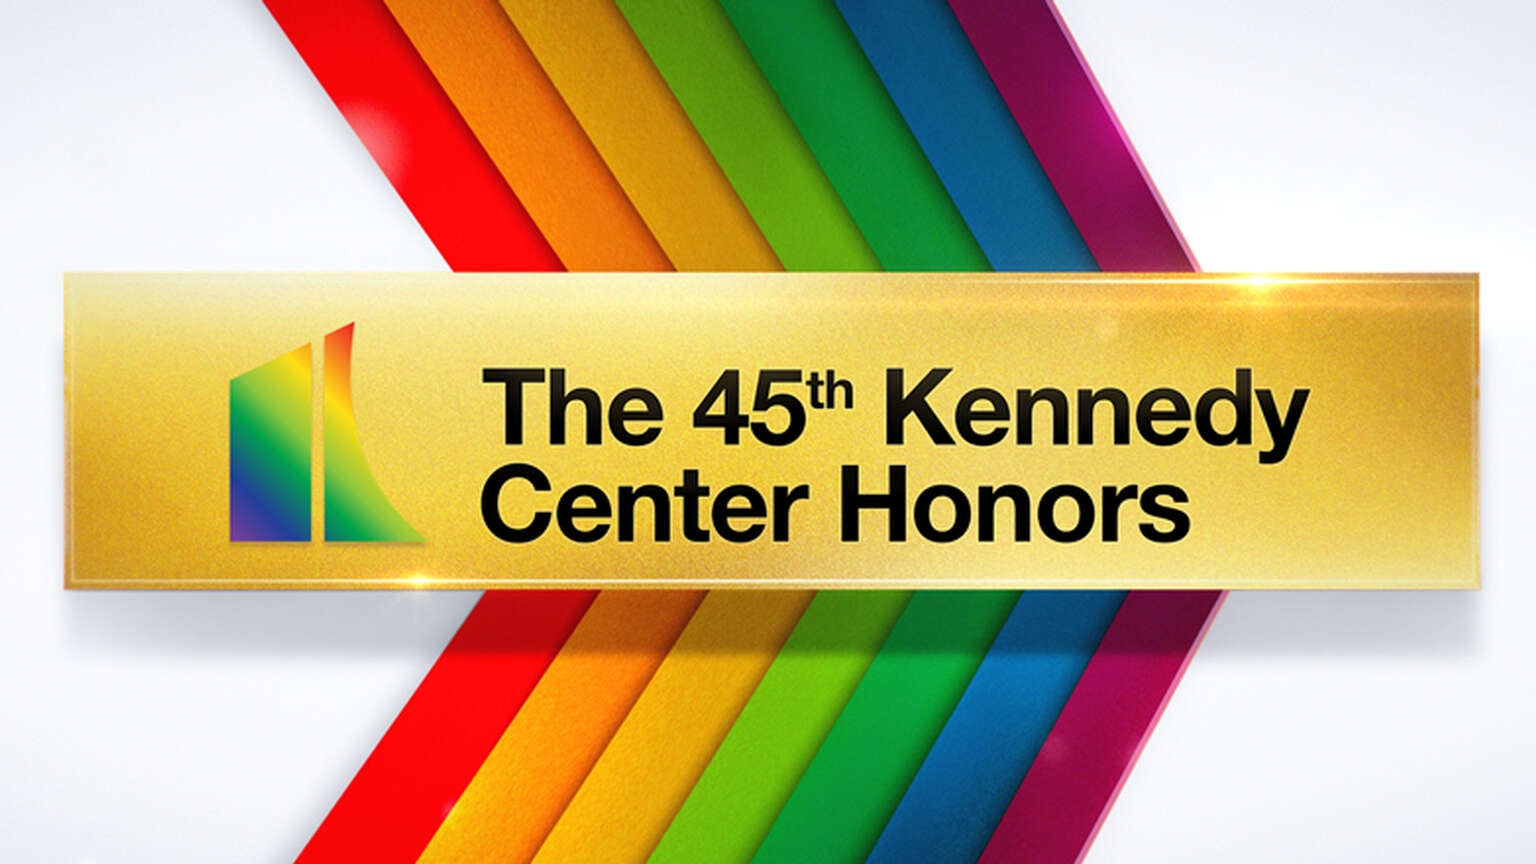 How to Watch 2022 Kennedy Center Honors Live Online for Free Without